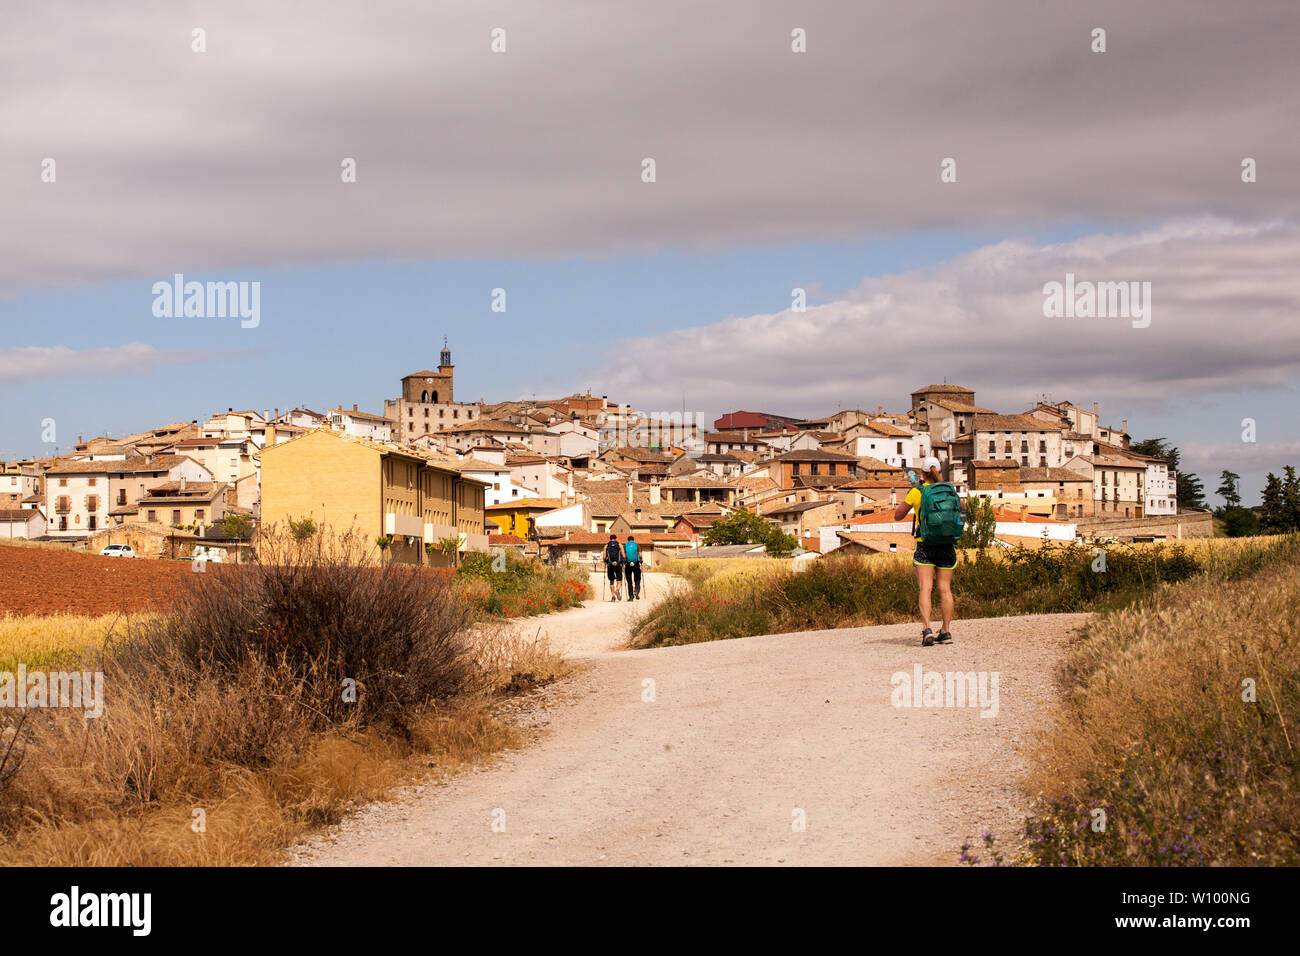 Woman pilgrim walking in the Spanish countryside on the Camino de Santiago the way of St James approaching the village of Cirauqui Navarra Spain Stock Photo